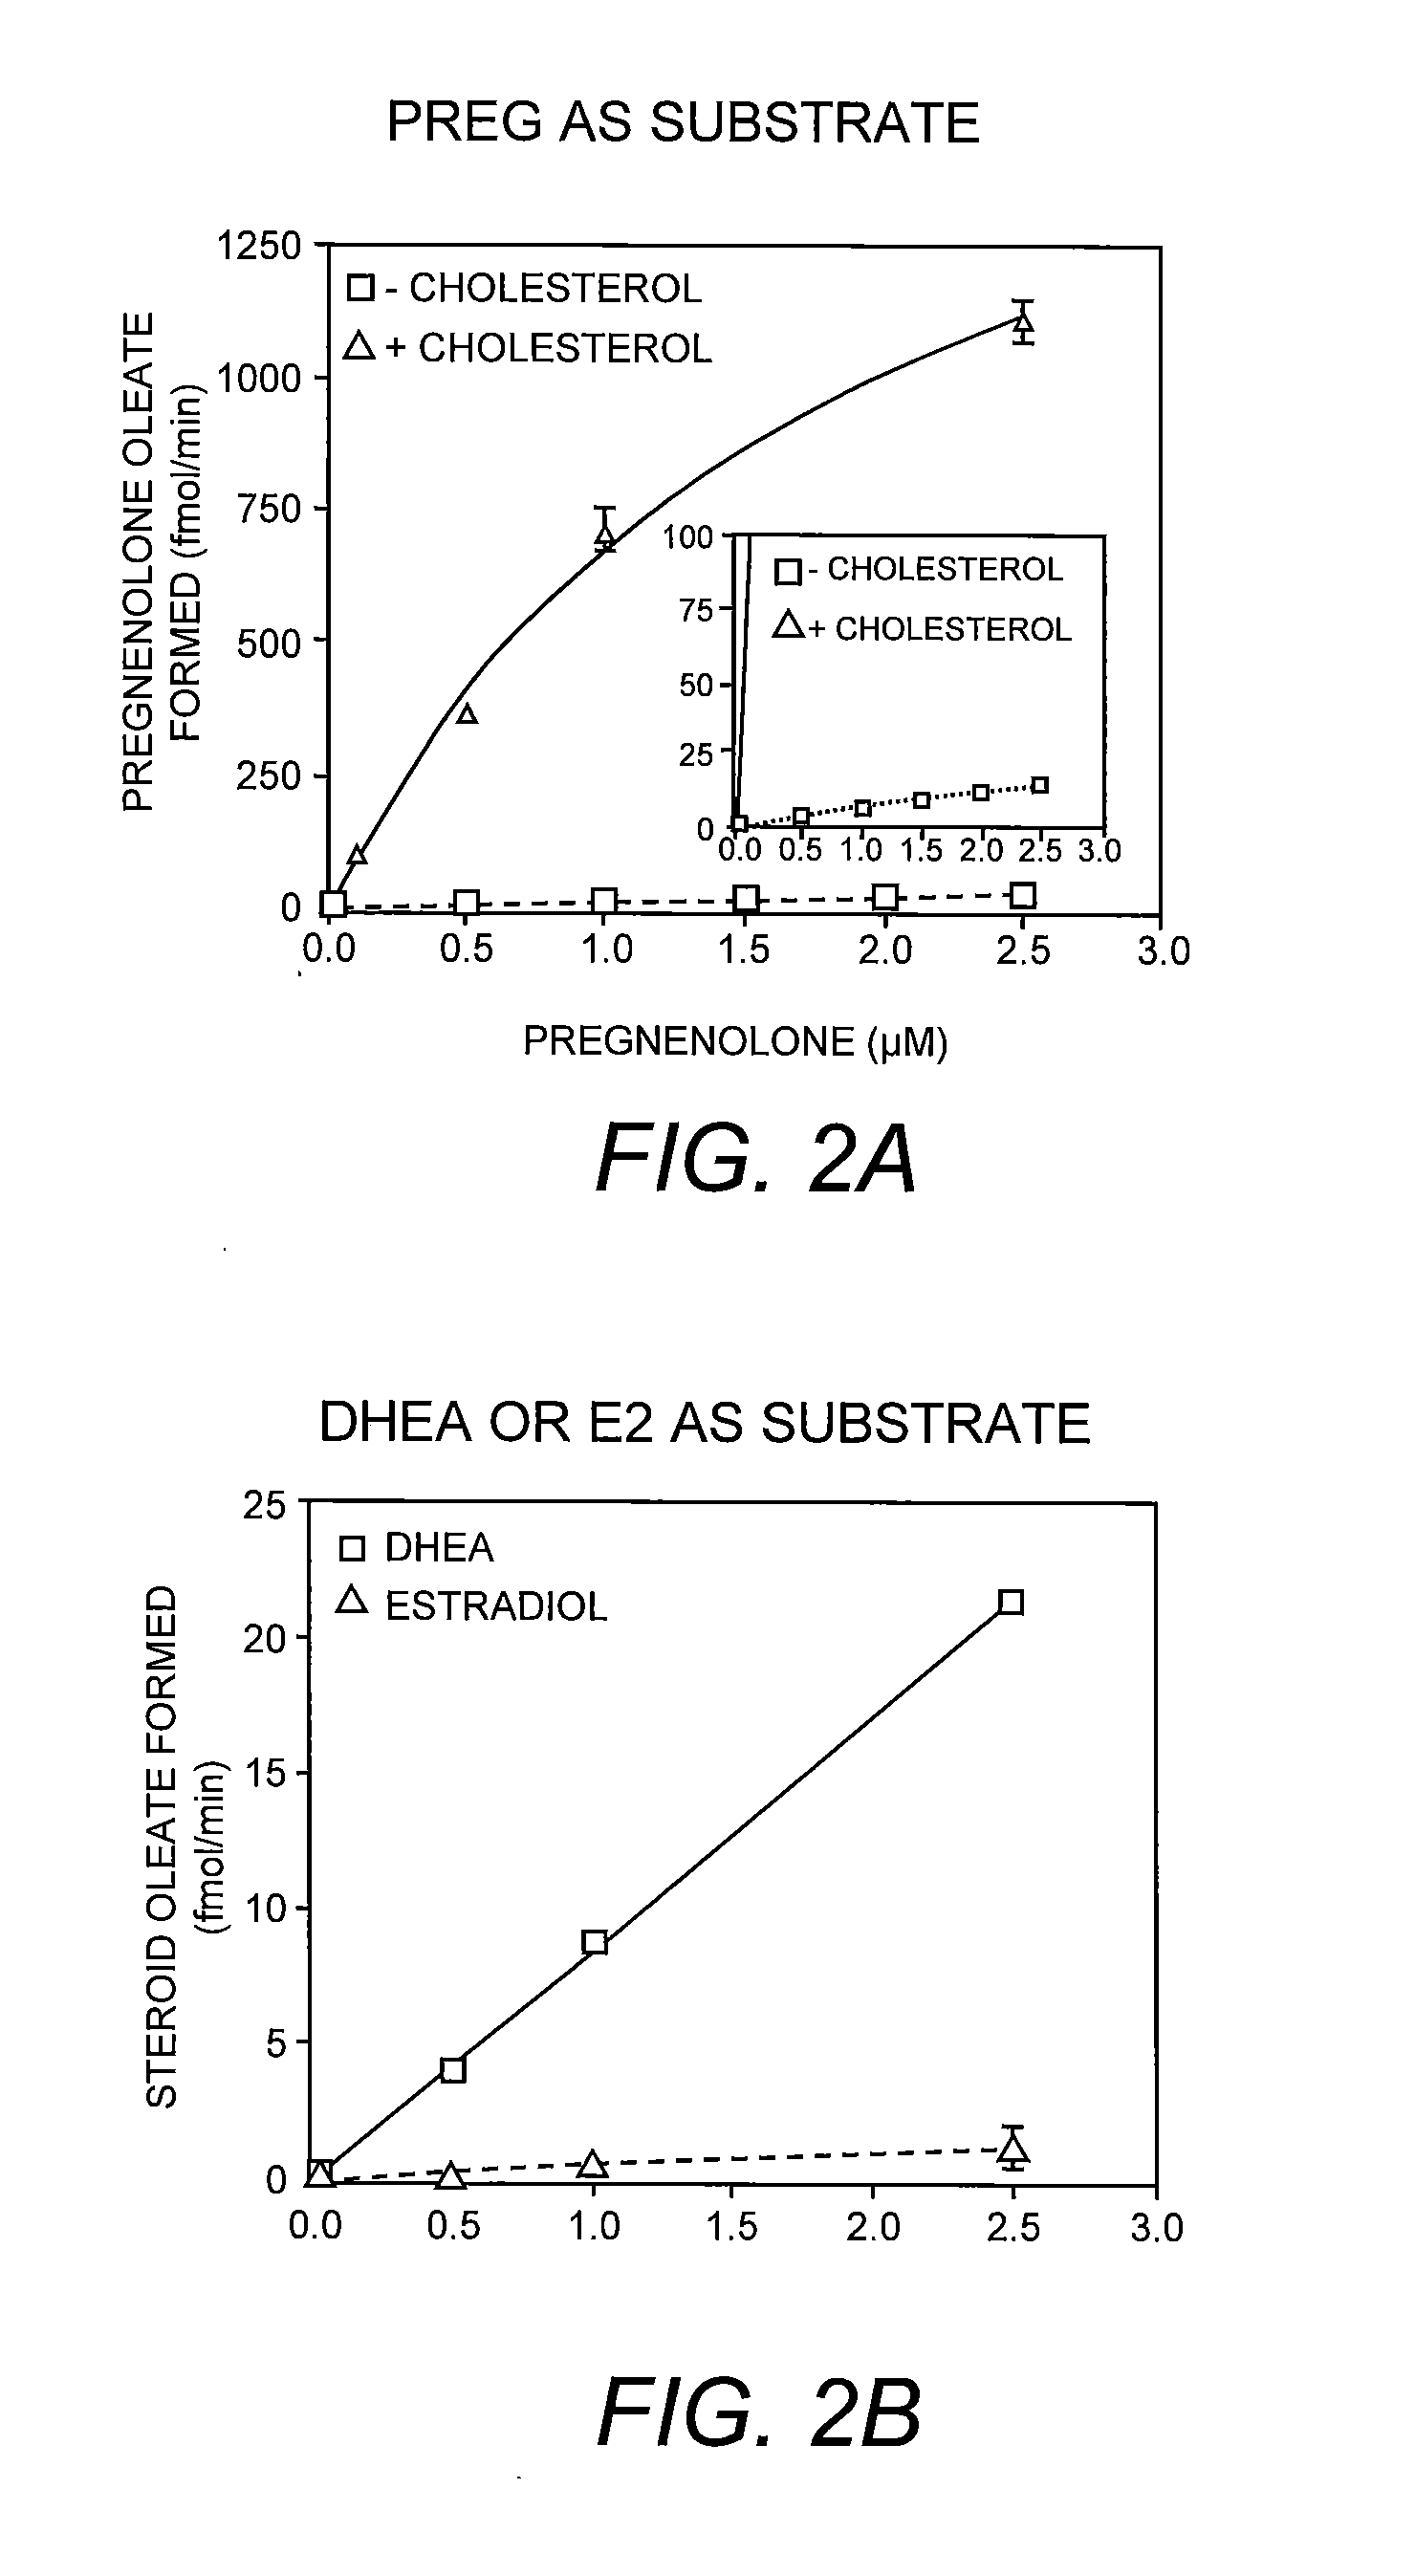 Methods for Identifying Allosteric and Other Novel Acyl-Coenzyme A:Cholesterol Acyltransferase Inhibitors